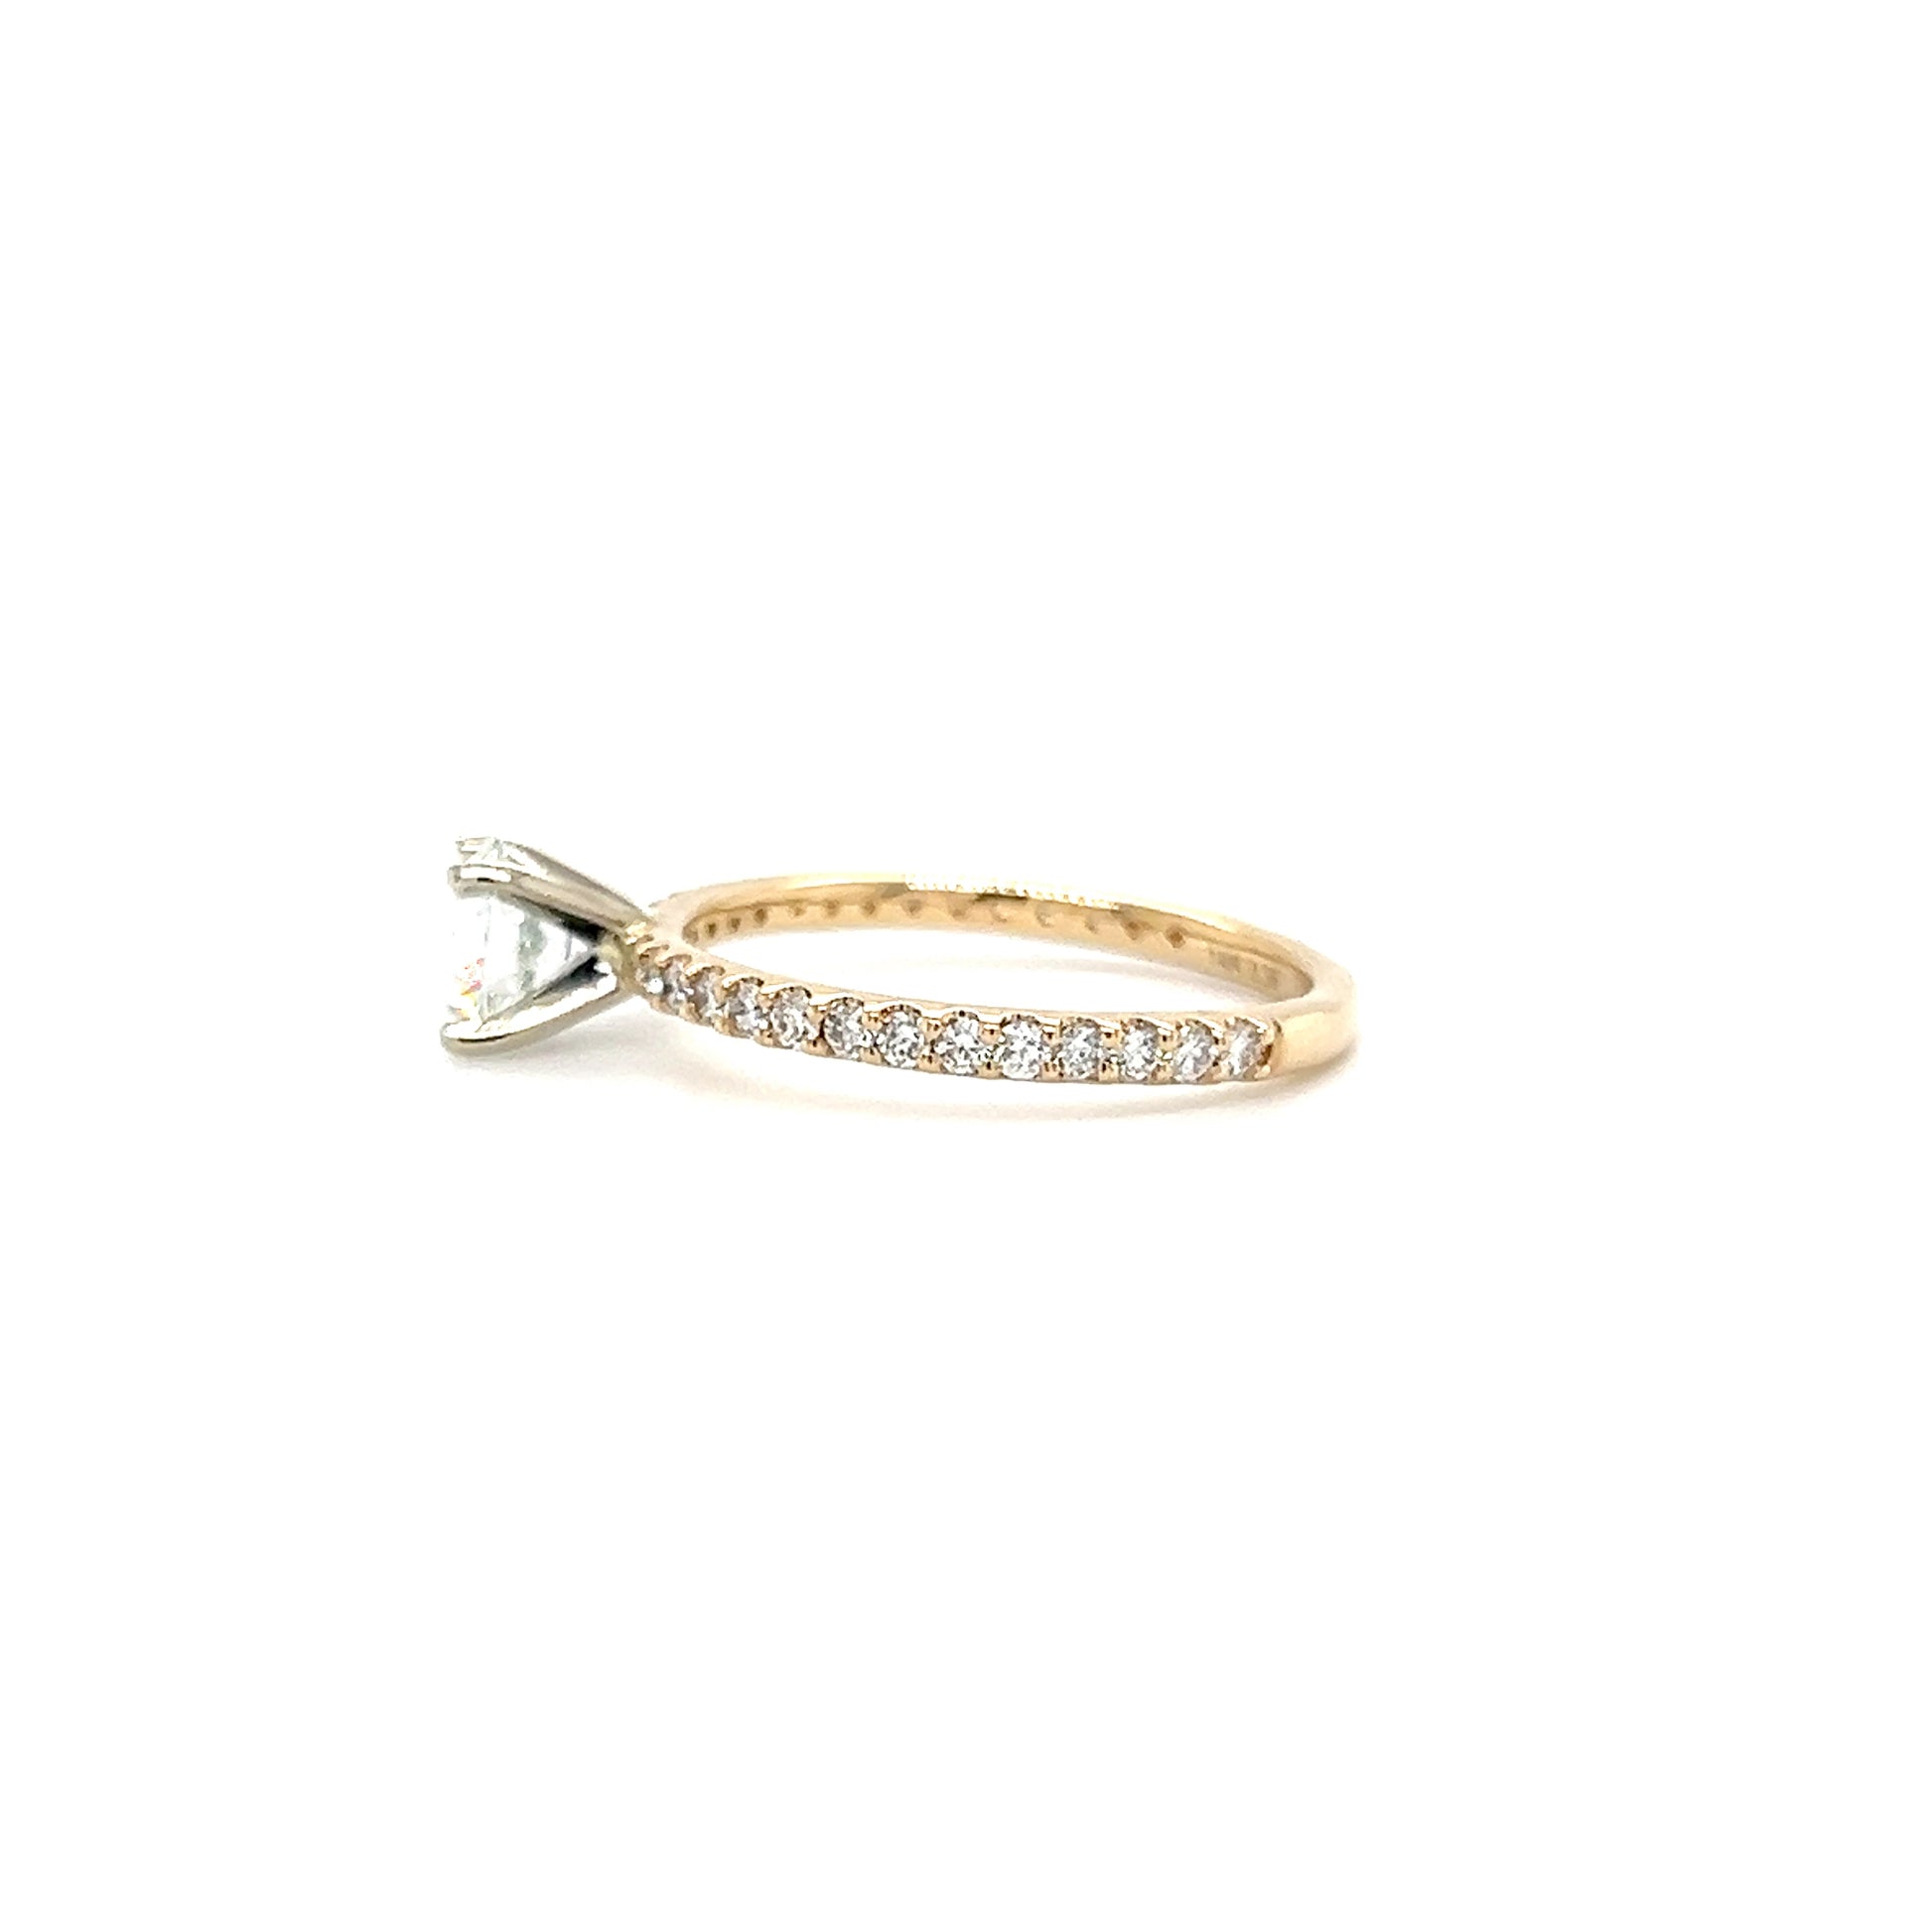 Solitaire Diamond Ring with 1.06ctw of Diamonds in 14K Yellow Gold Right Profile